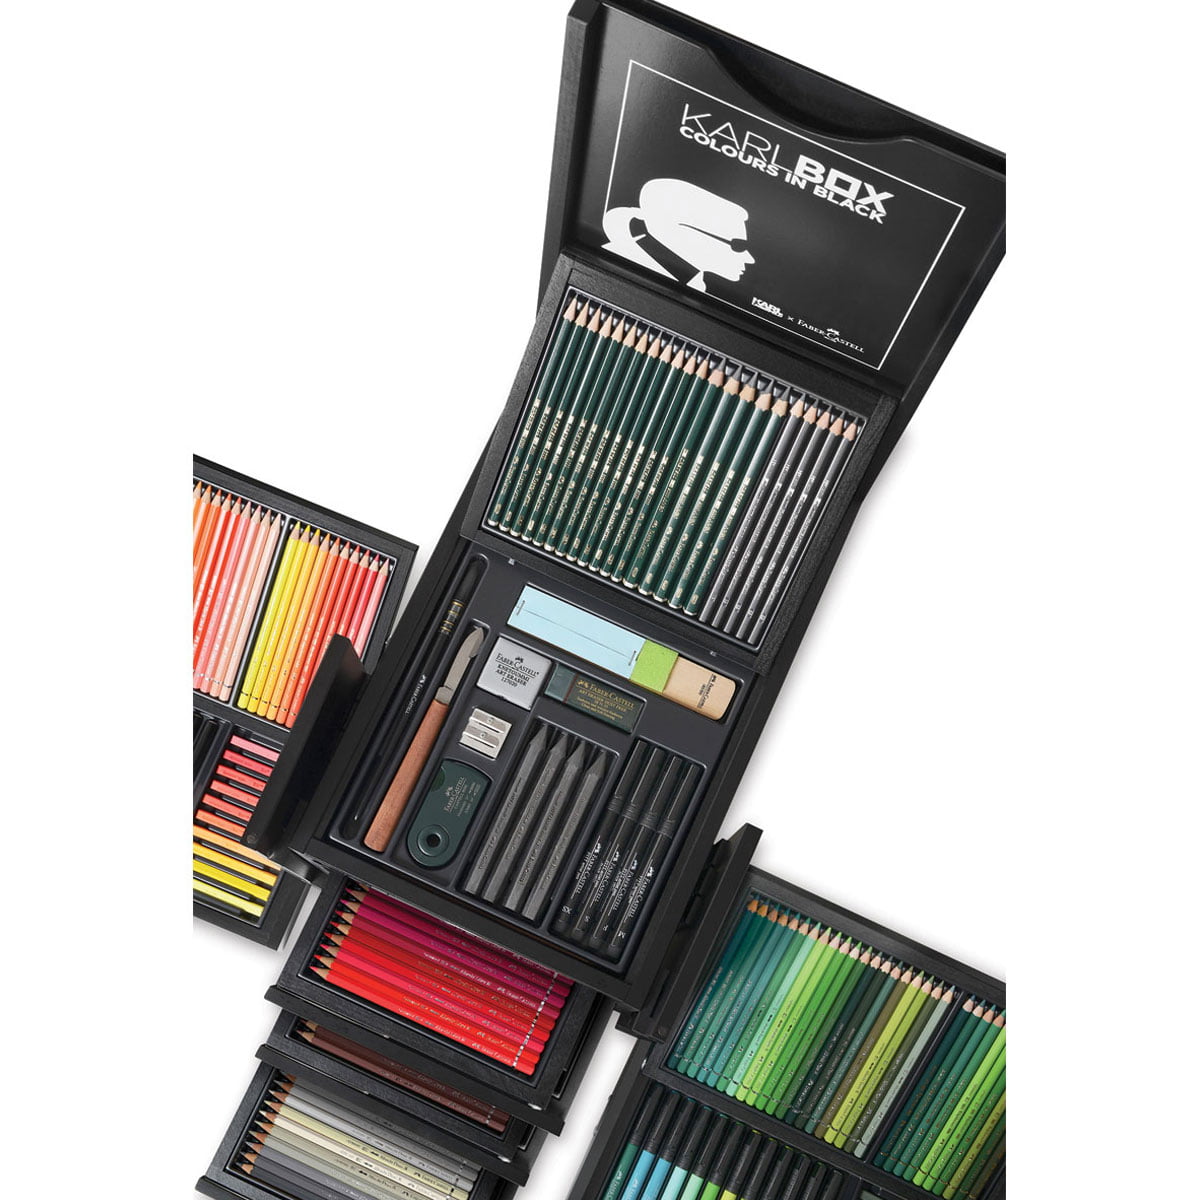 Karl Lagerfeld x Faber-Castell $3,000 Color Pencil Set Is Not For All  Artists - SHOUTS